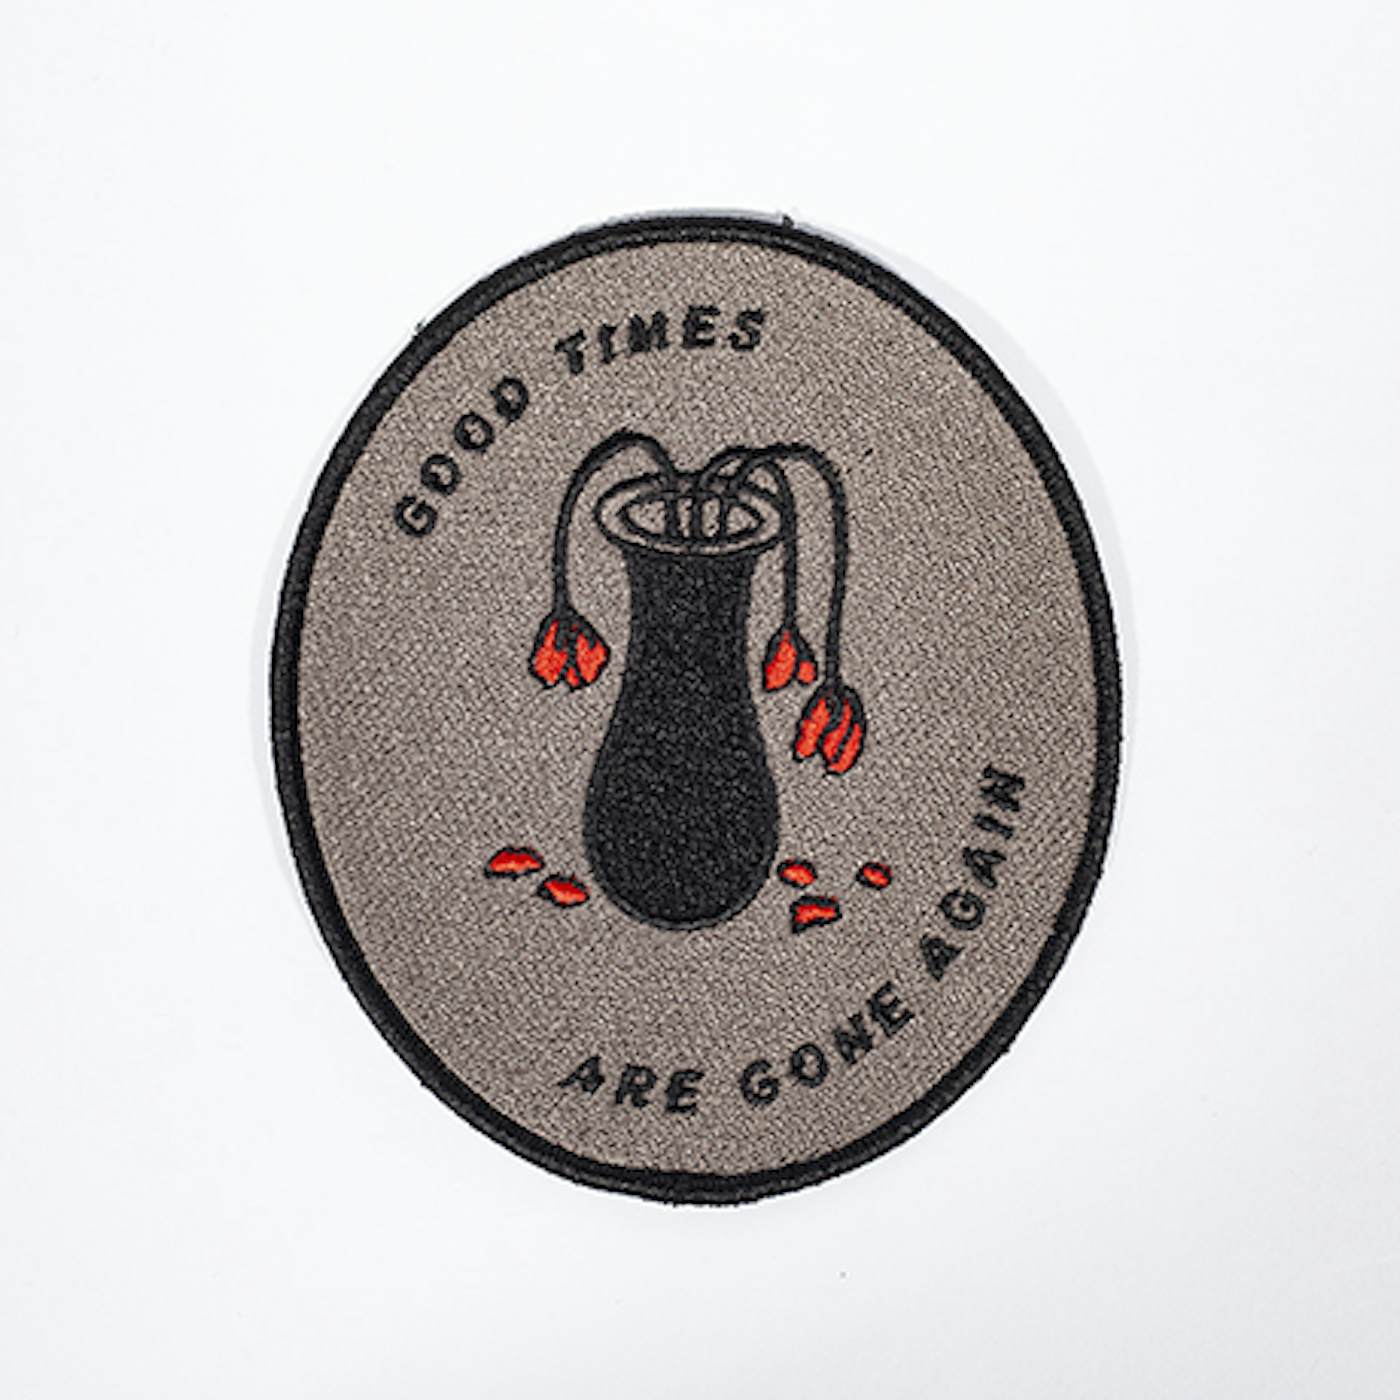 Fred Thomas Good Times Are Gone Again Patch (3.25" x 4")